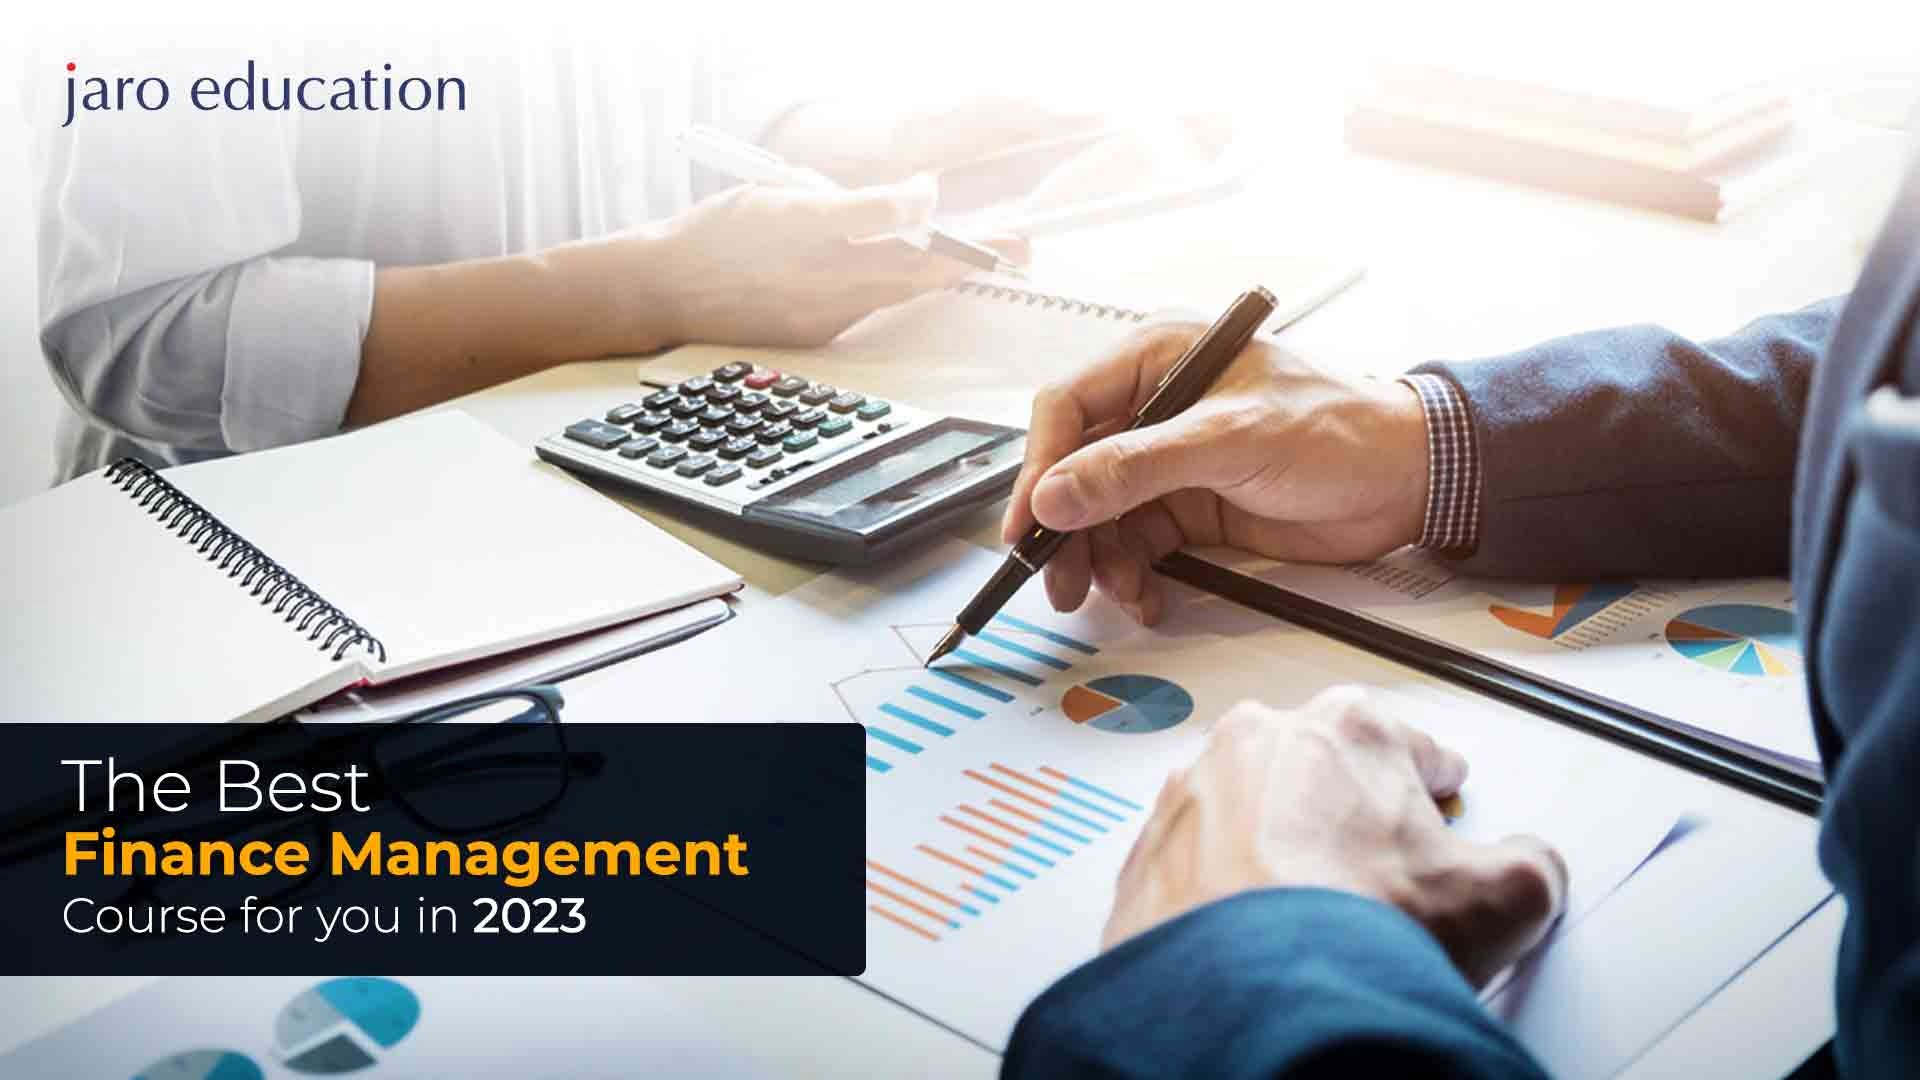 The-Best-Finance-Management-Course-for-you-in-2022_37_11zon jaro